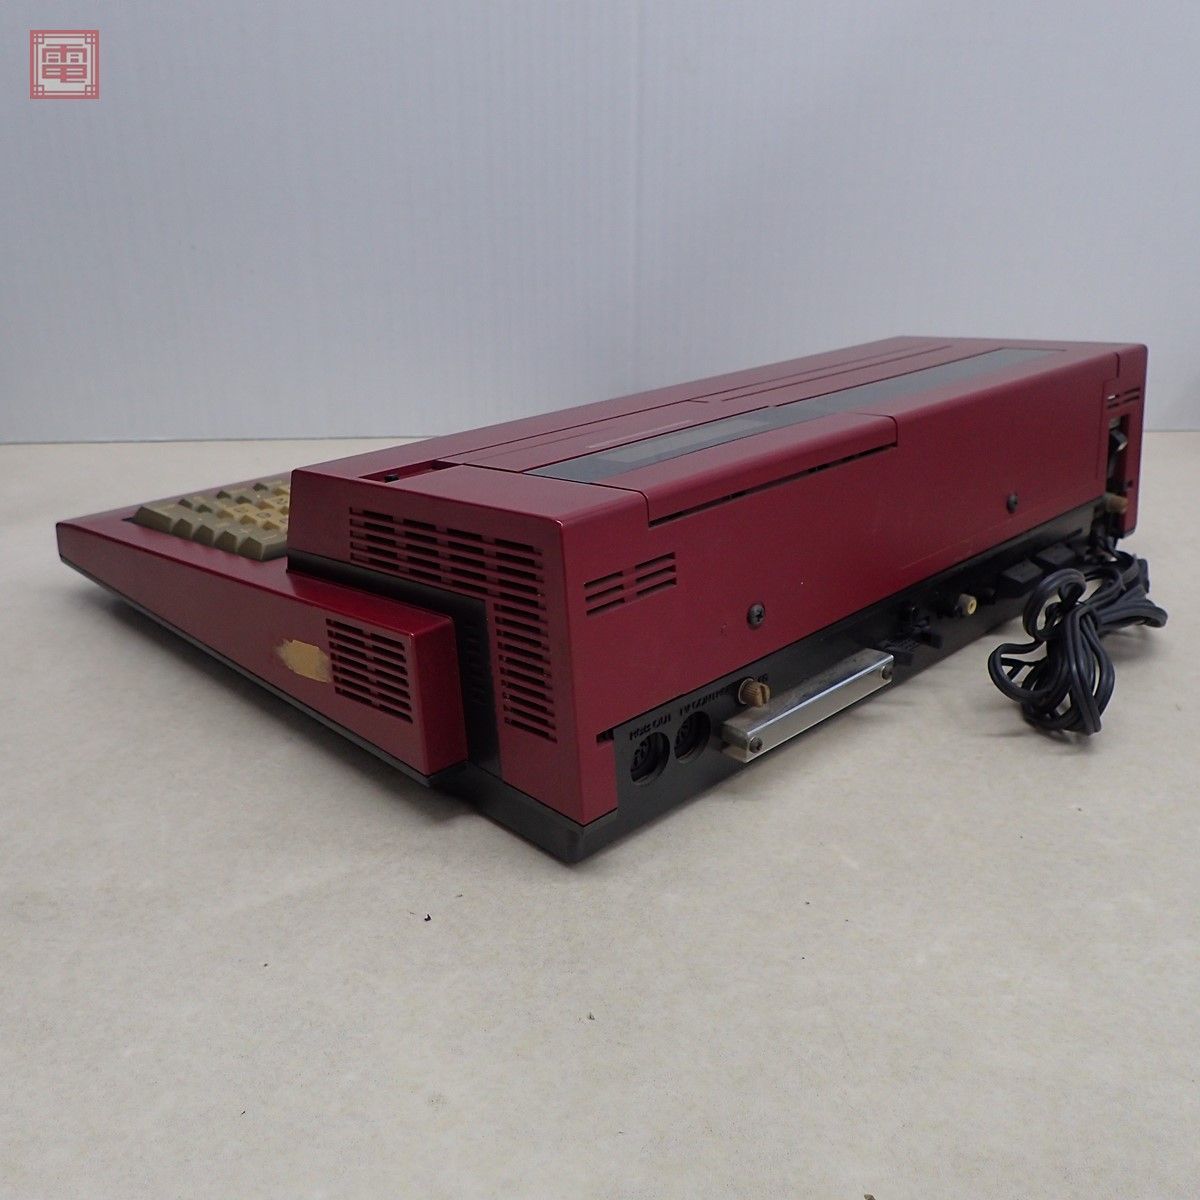  sharp X1 CZ-801CR body only rose red X1C SHARP operation defect Junk parts taking .. please [40